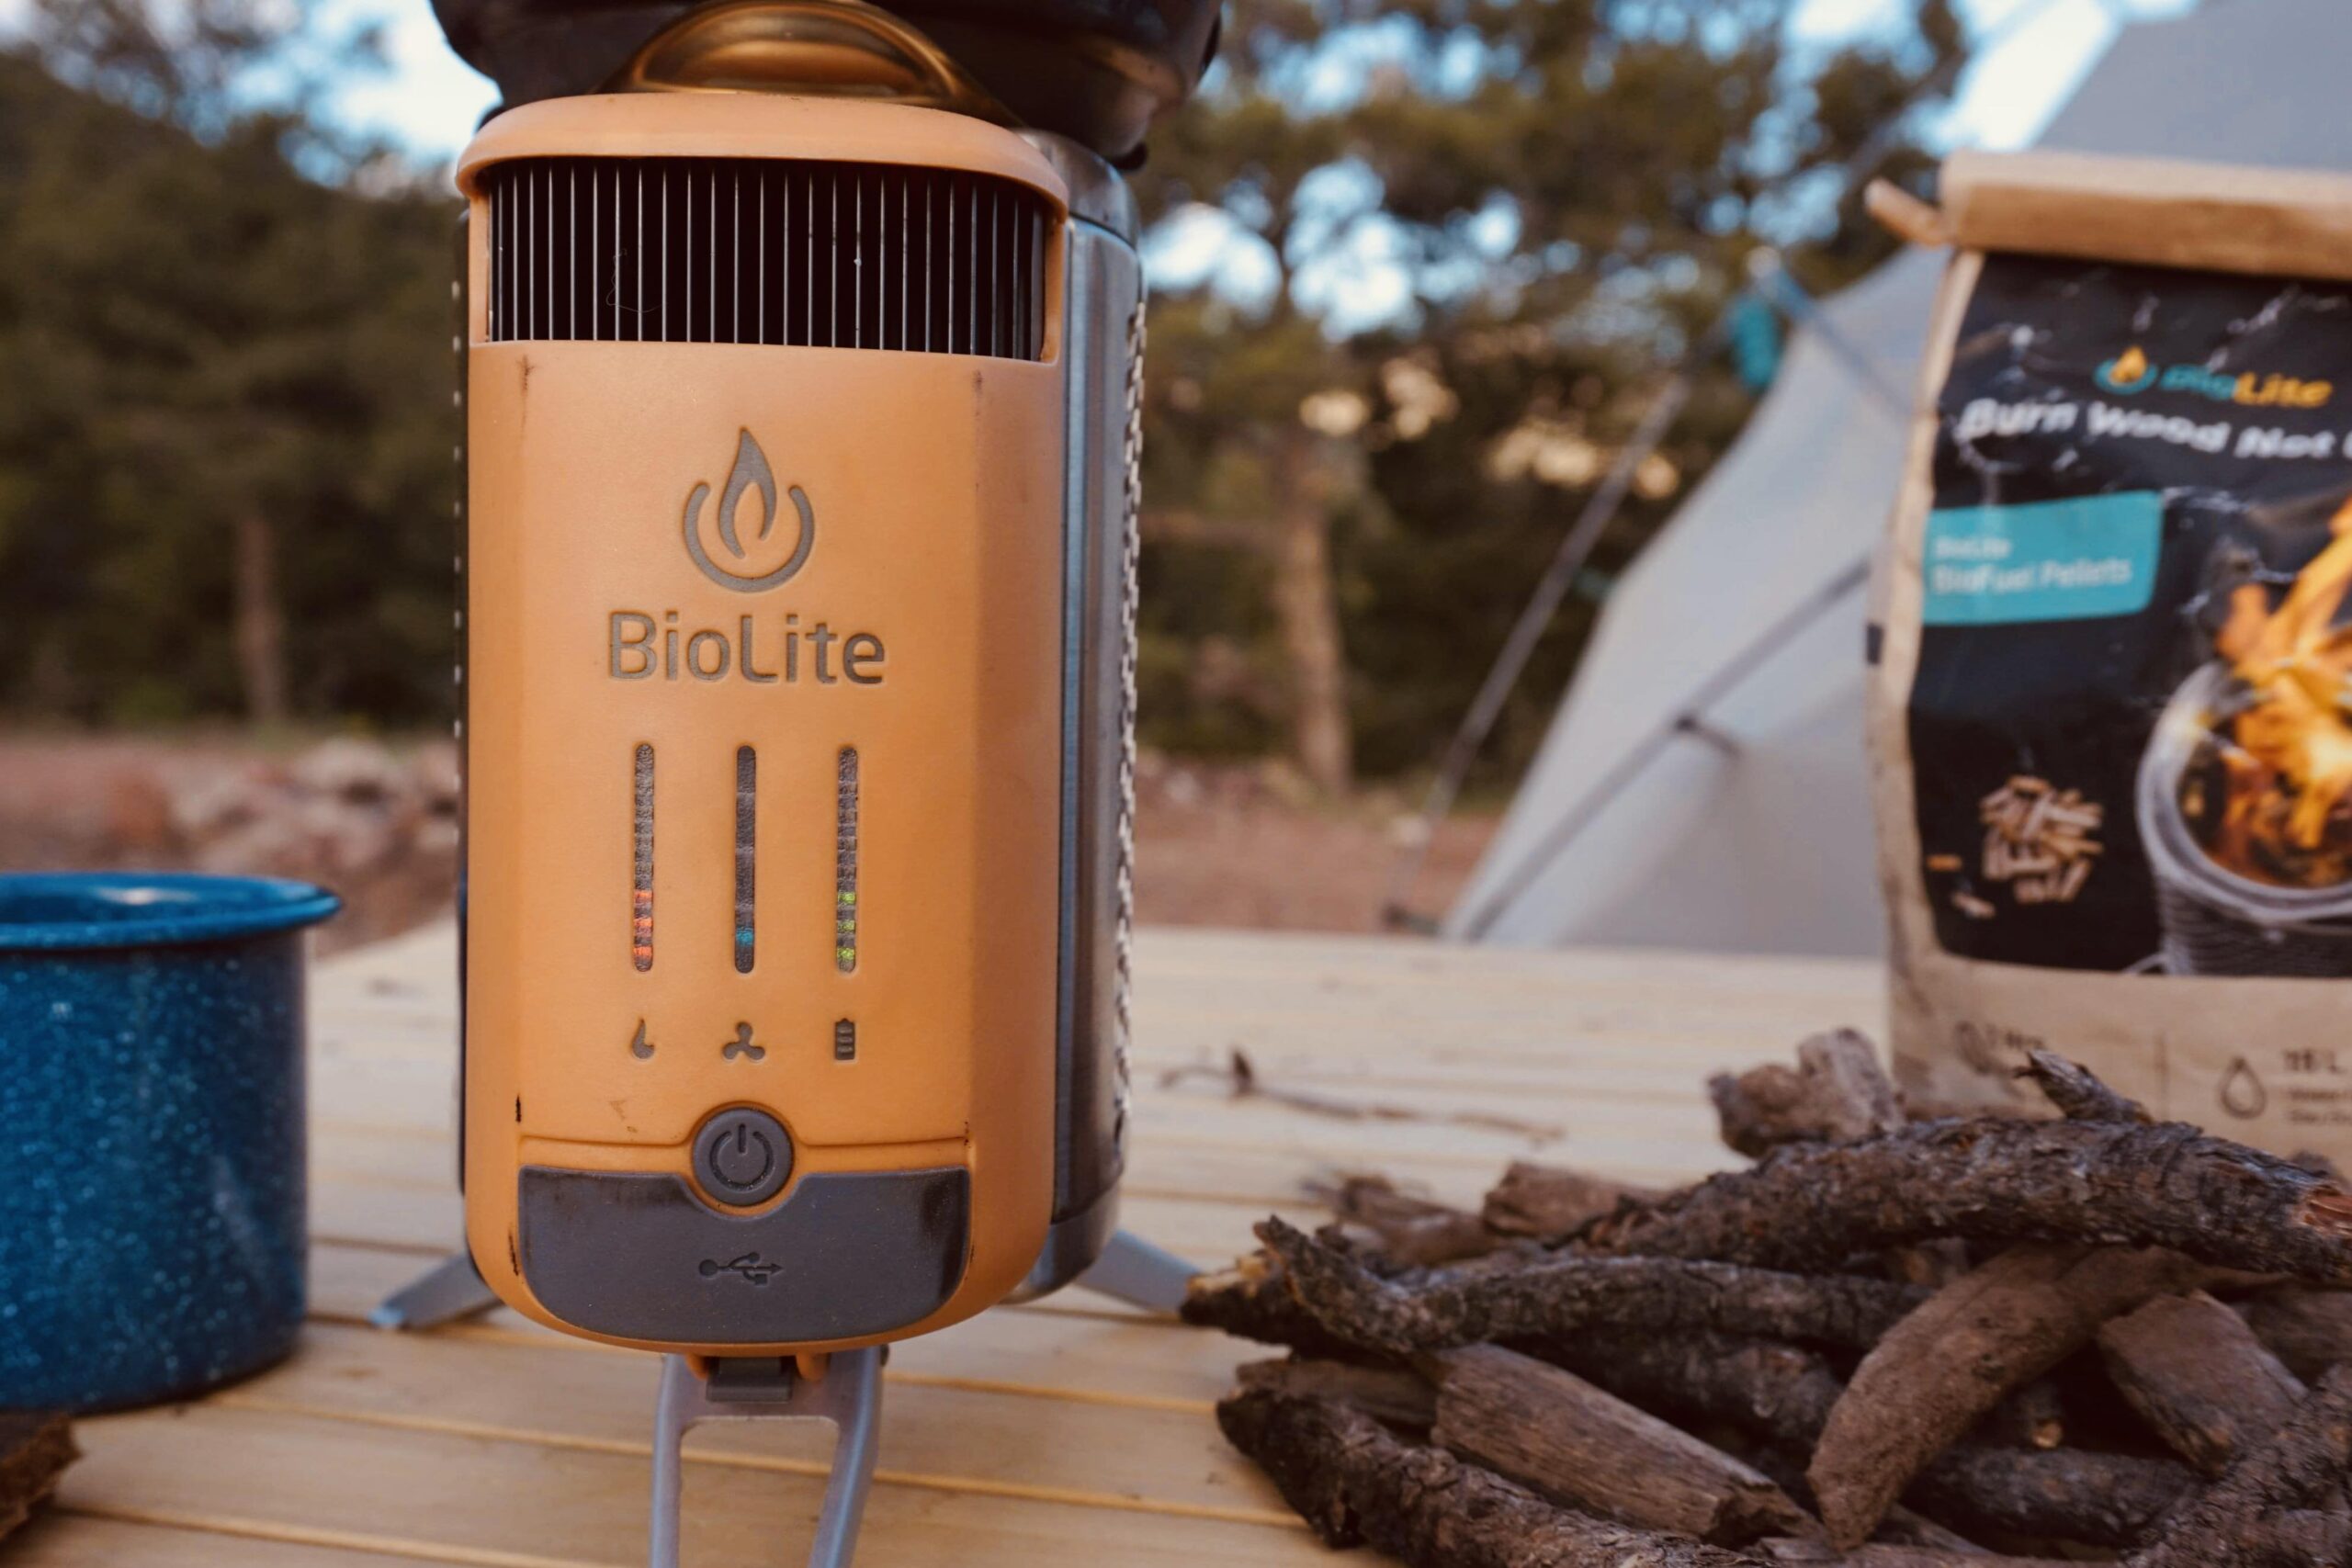 Why the BioLite Campstove Is the Best Camping Gadget